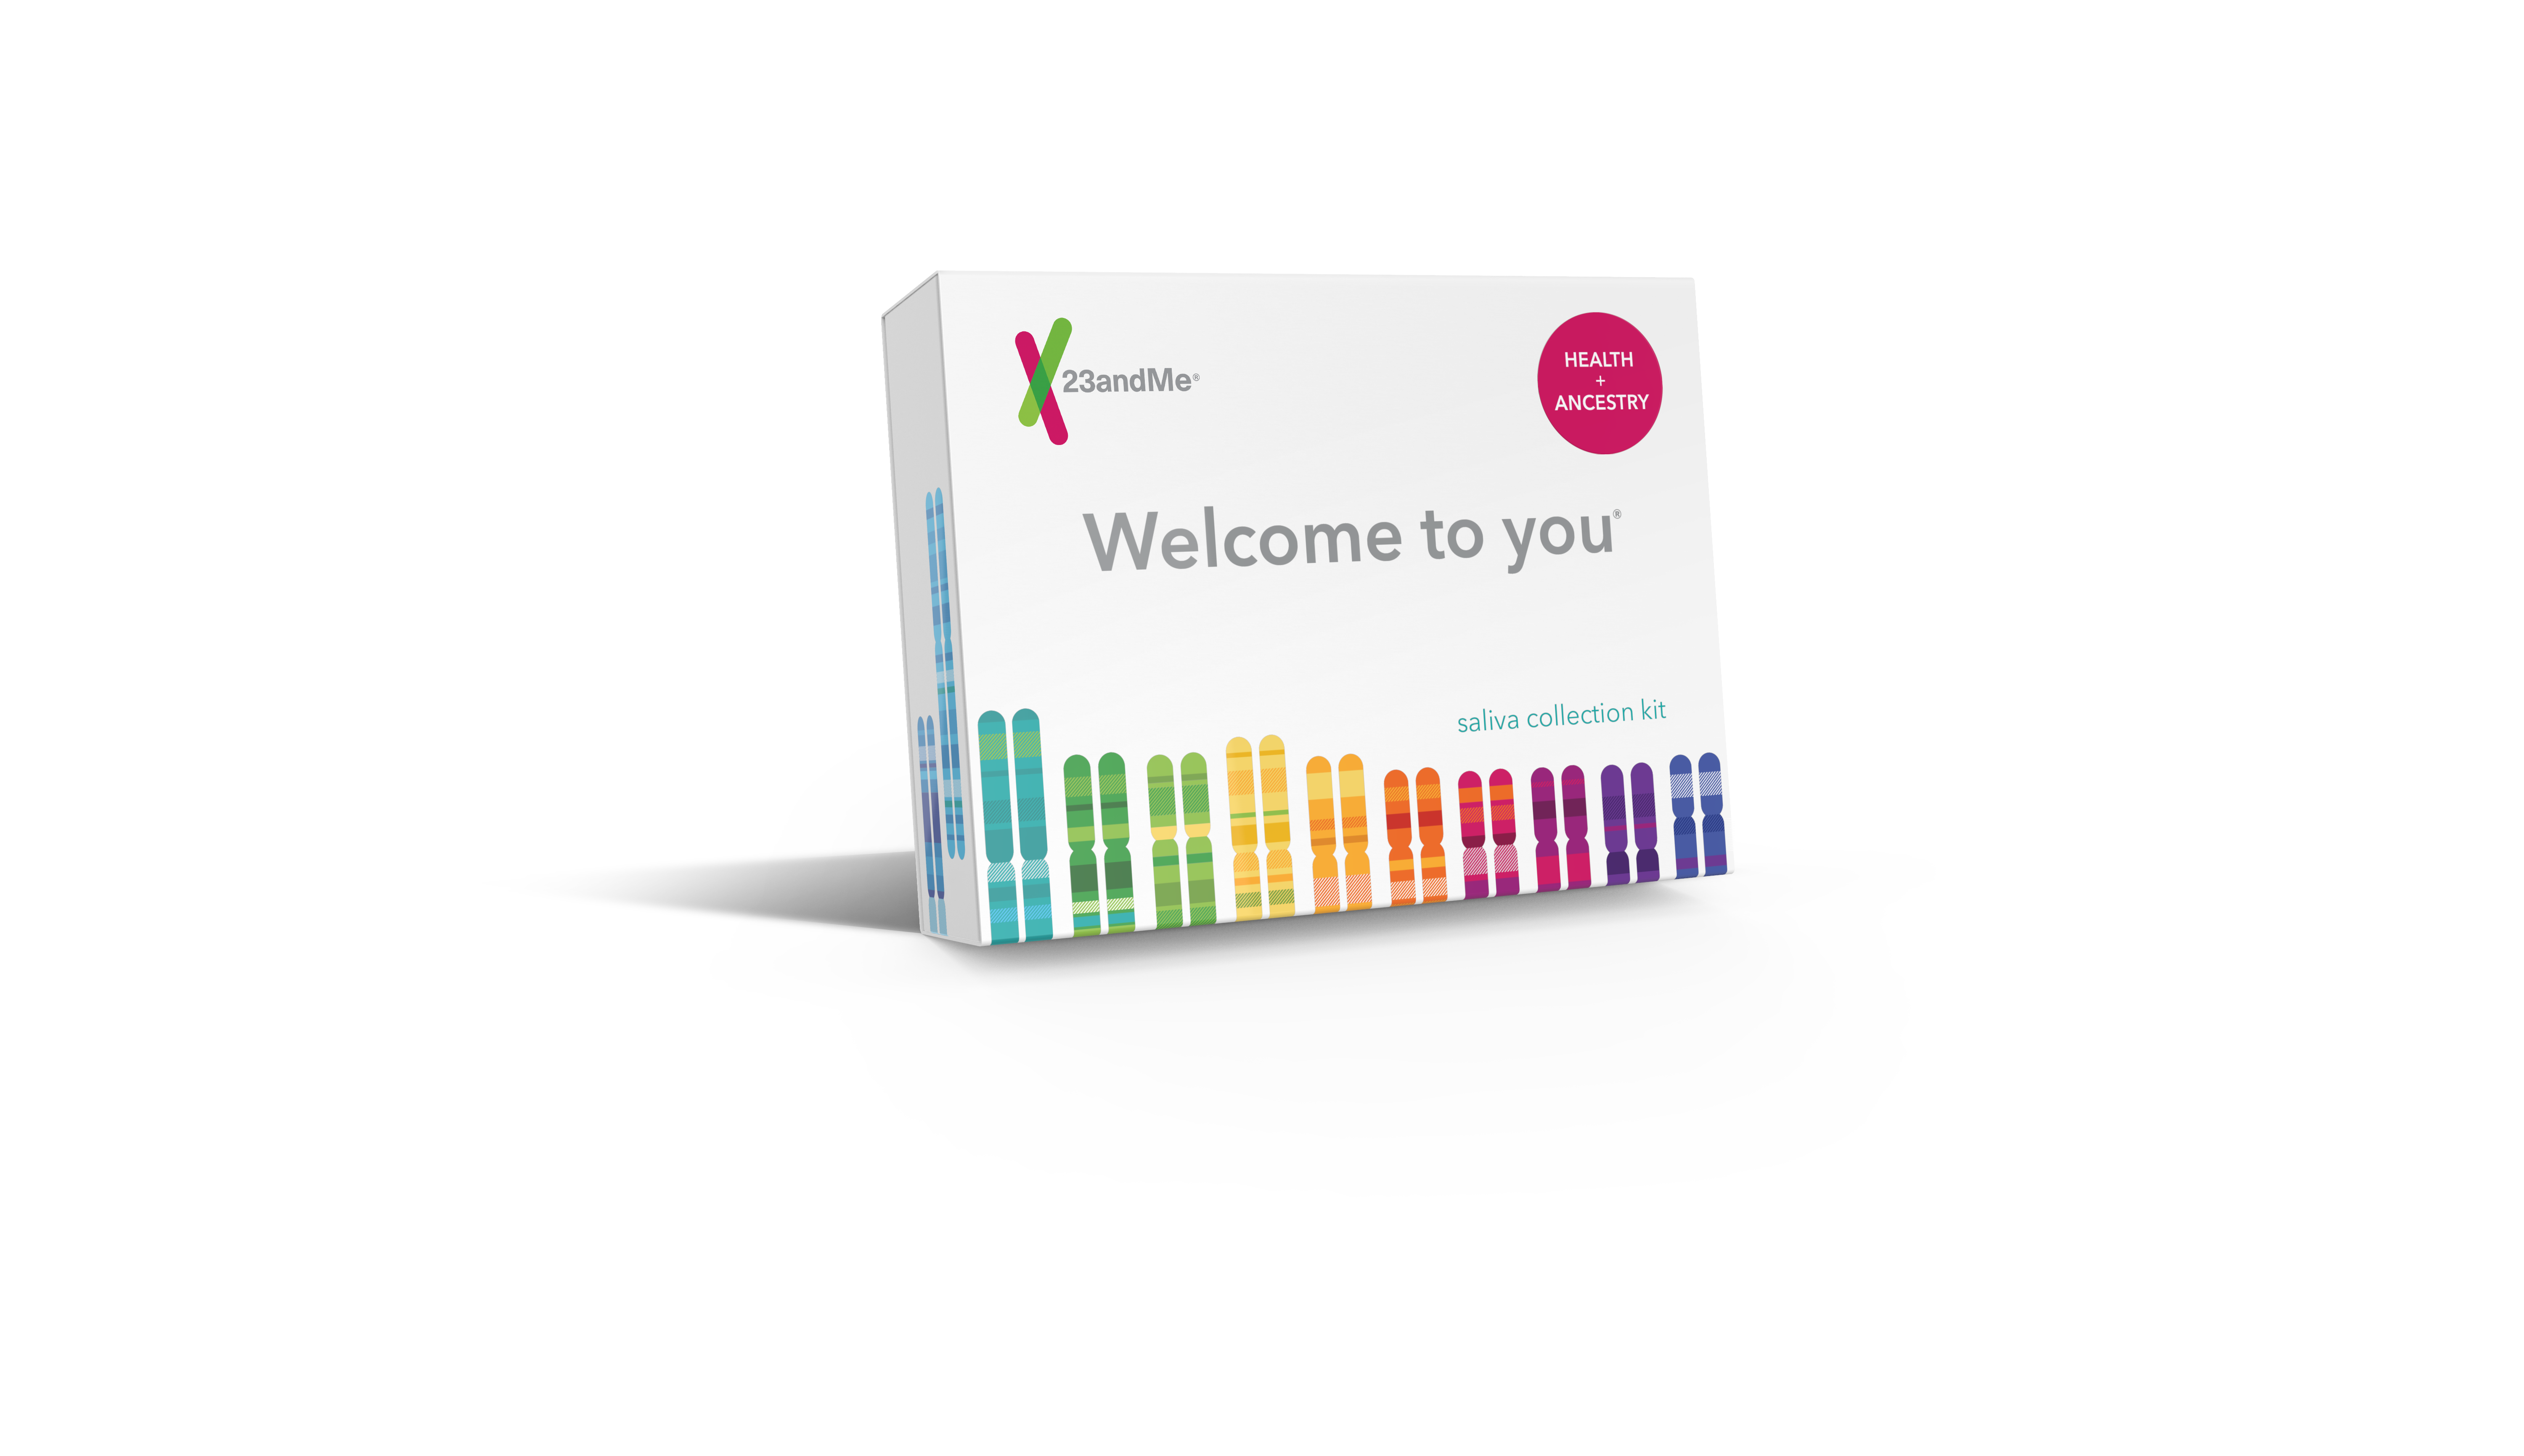 Product image of a 23andMe Health + Ancestry Service kit 